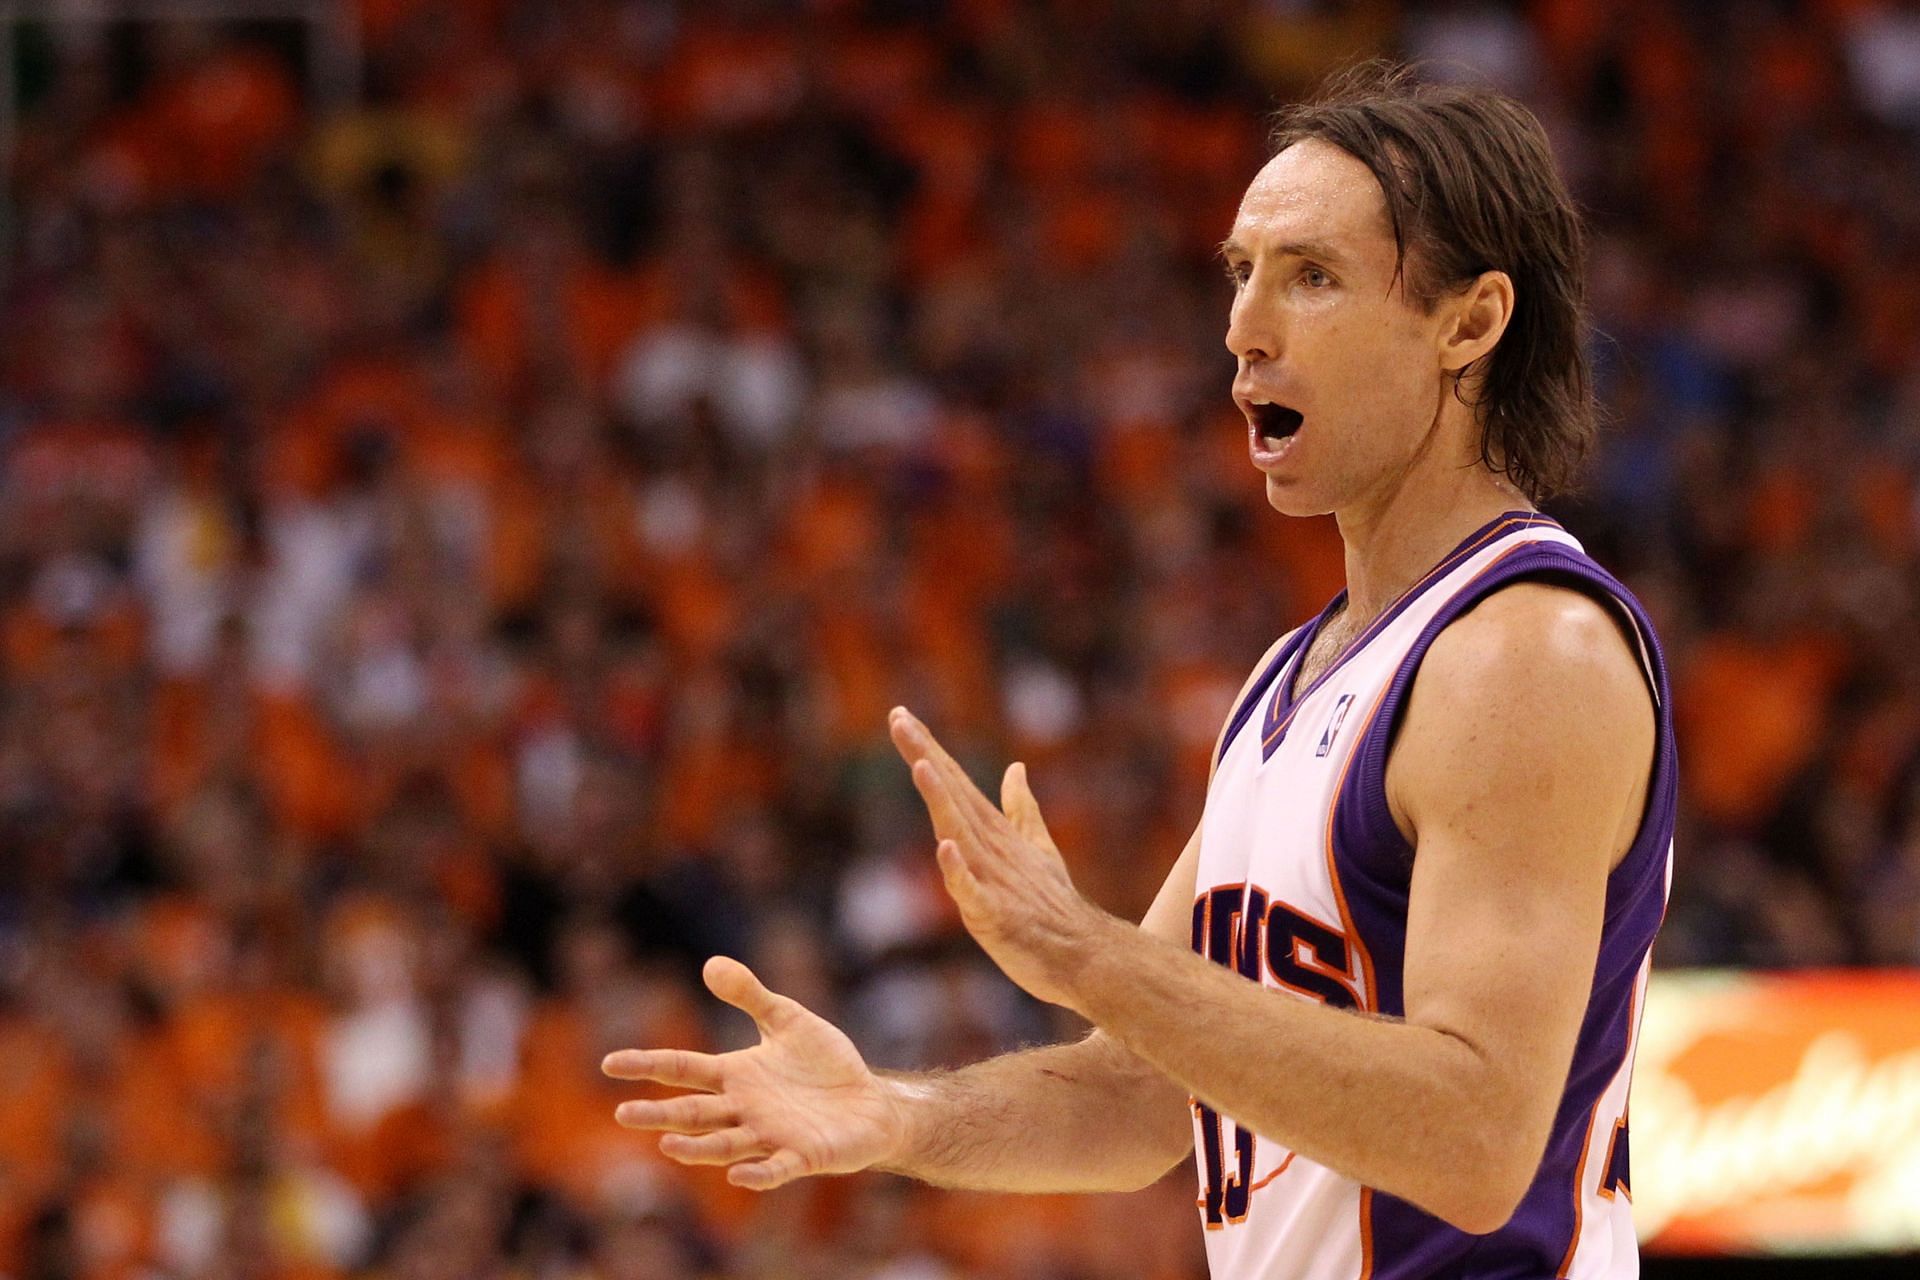 Steve Nash was one of the greatest draft picks for the Phoenix Suns (Image via Getty Images)